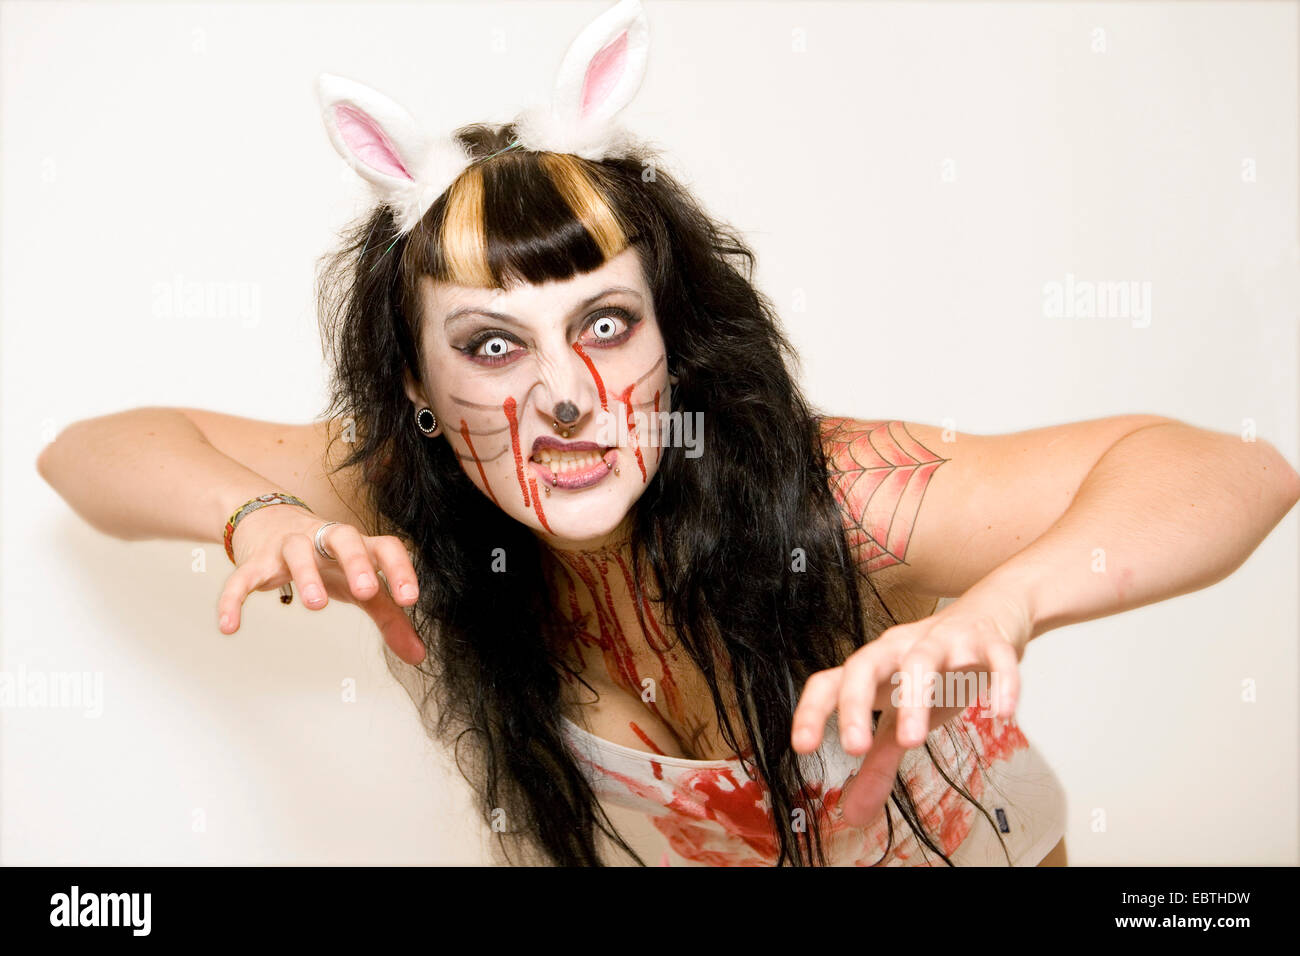 young woman wearing a Halloween costum is making threatening gesture Stock Photo